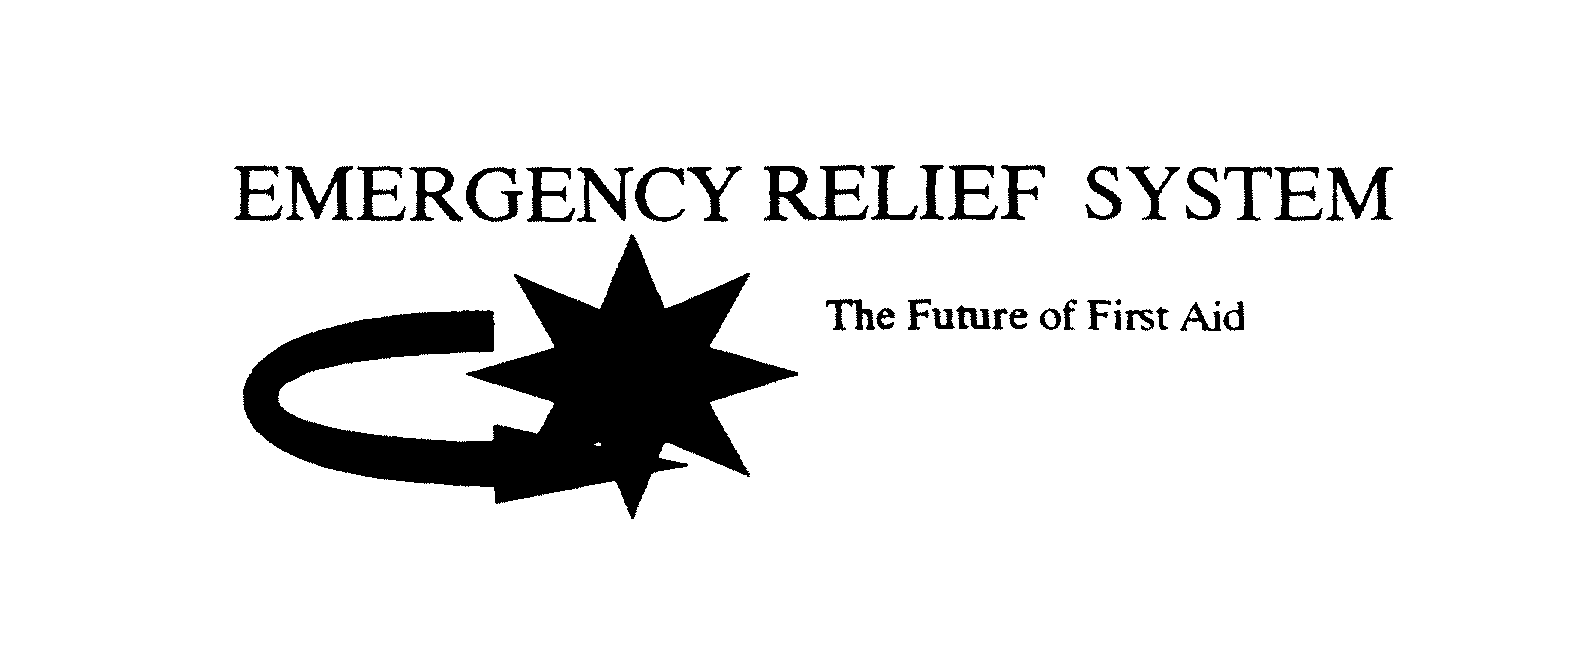  EMERGENCY RELIEF SYSTEM THE FUTURE OF FIRST AID